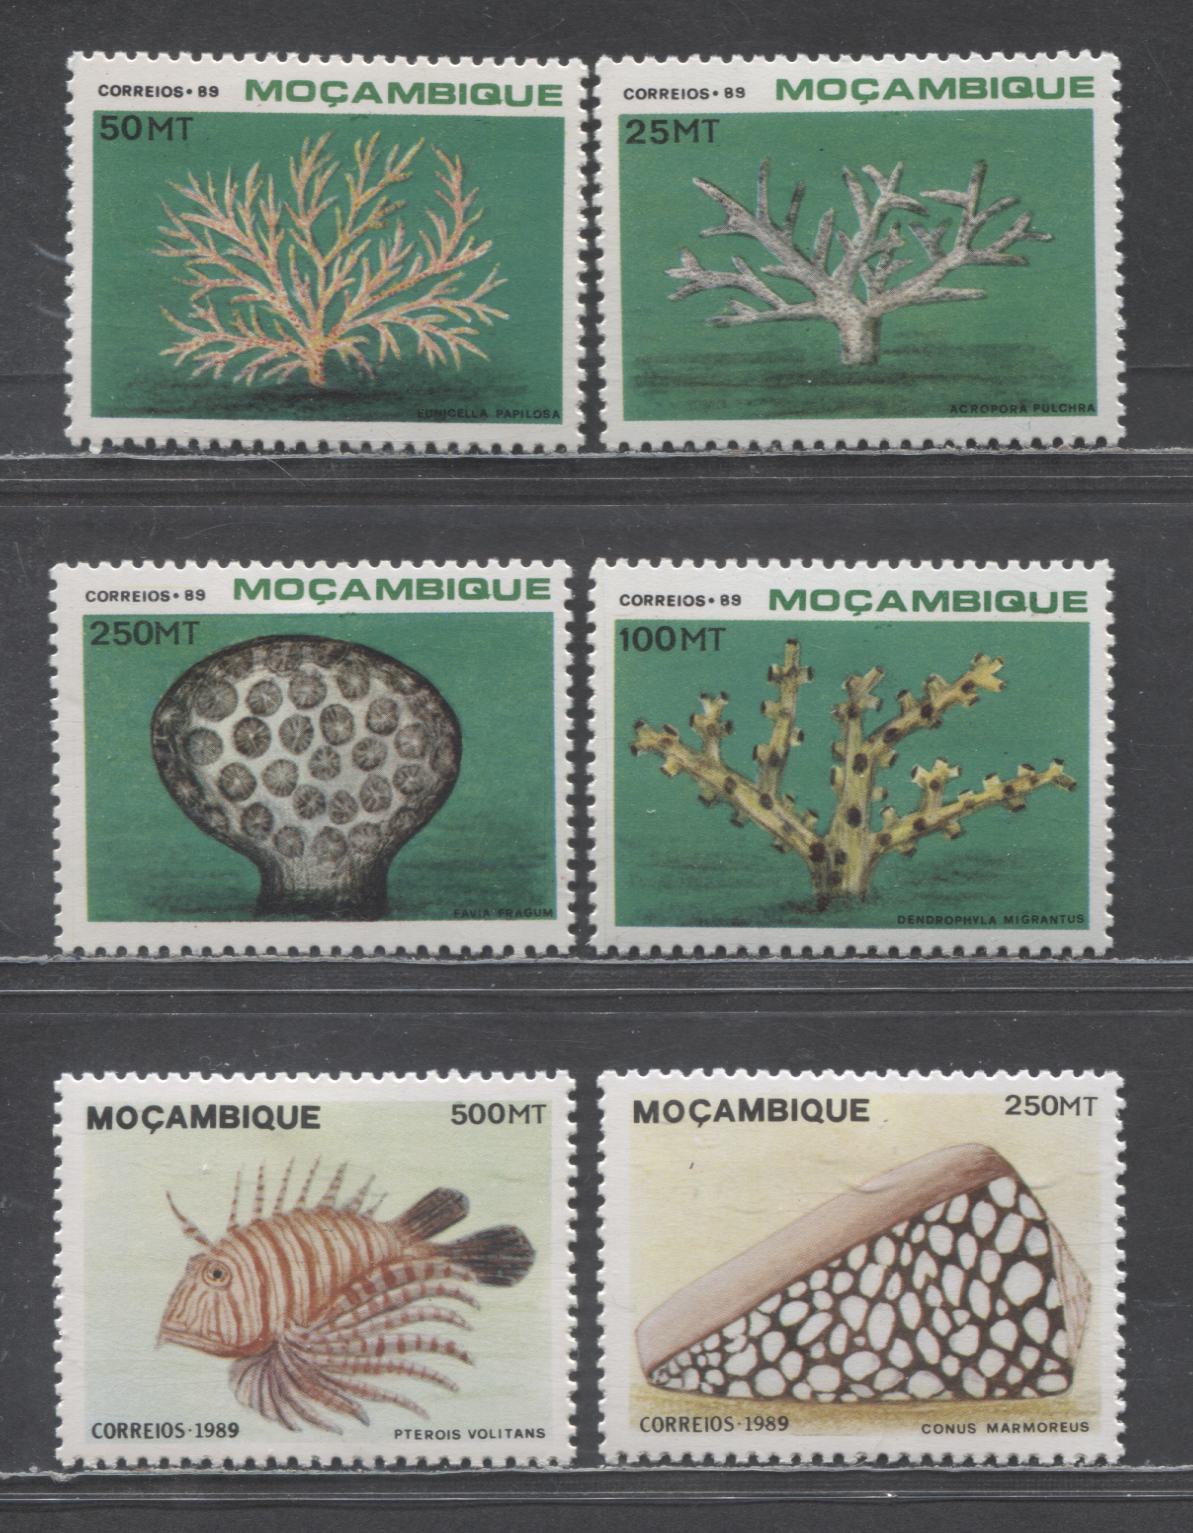 Lot 111 Mozambique SC#1077/1083 1989 Corals & Venomous Species Issues, 6 VFOG Singles, Click on Listing to See ALL Pictures, 2017 Scott Cat. $7.95